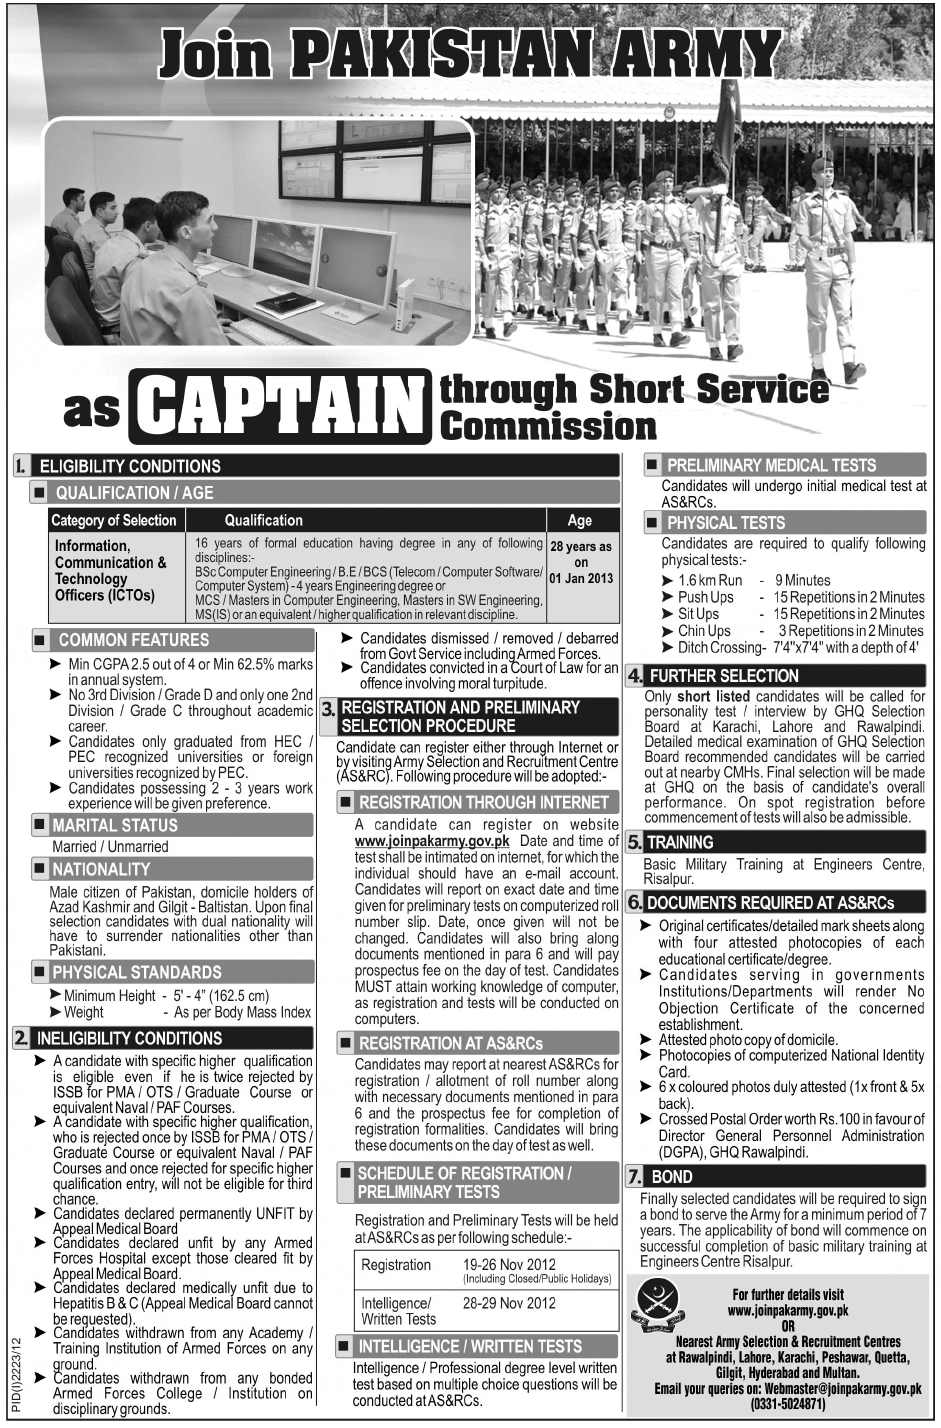 Join Pakistan Army as Captain ICTO Through Short Service Commission 2012